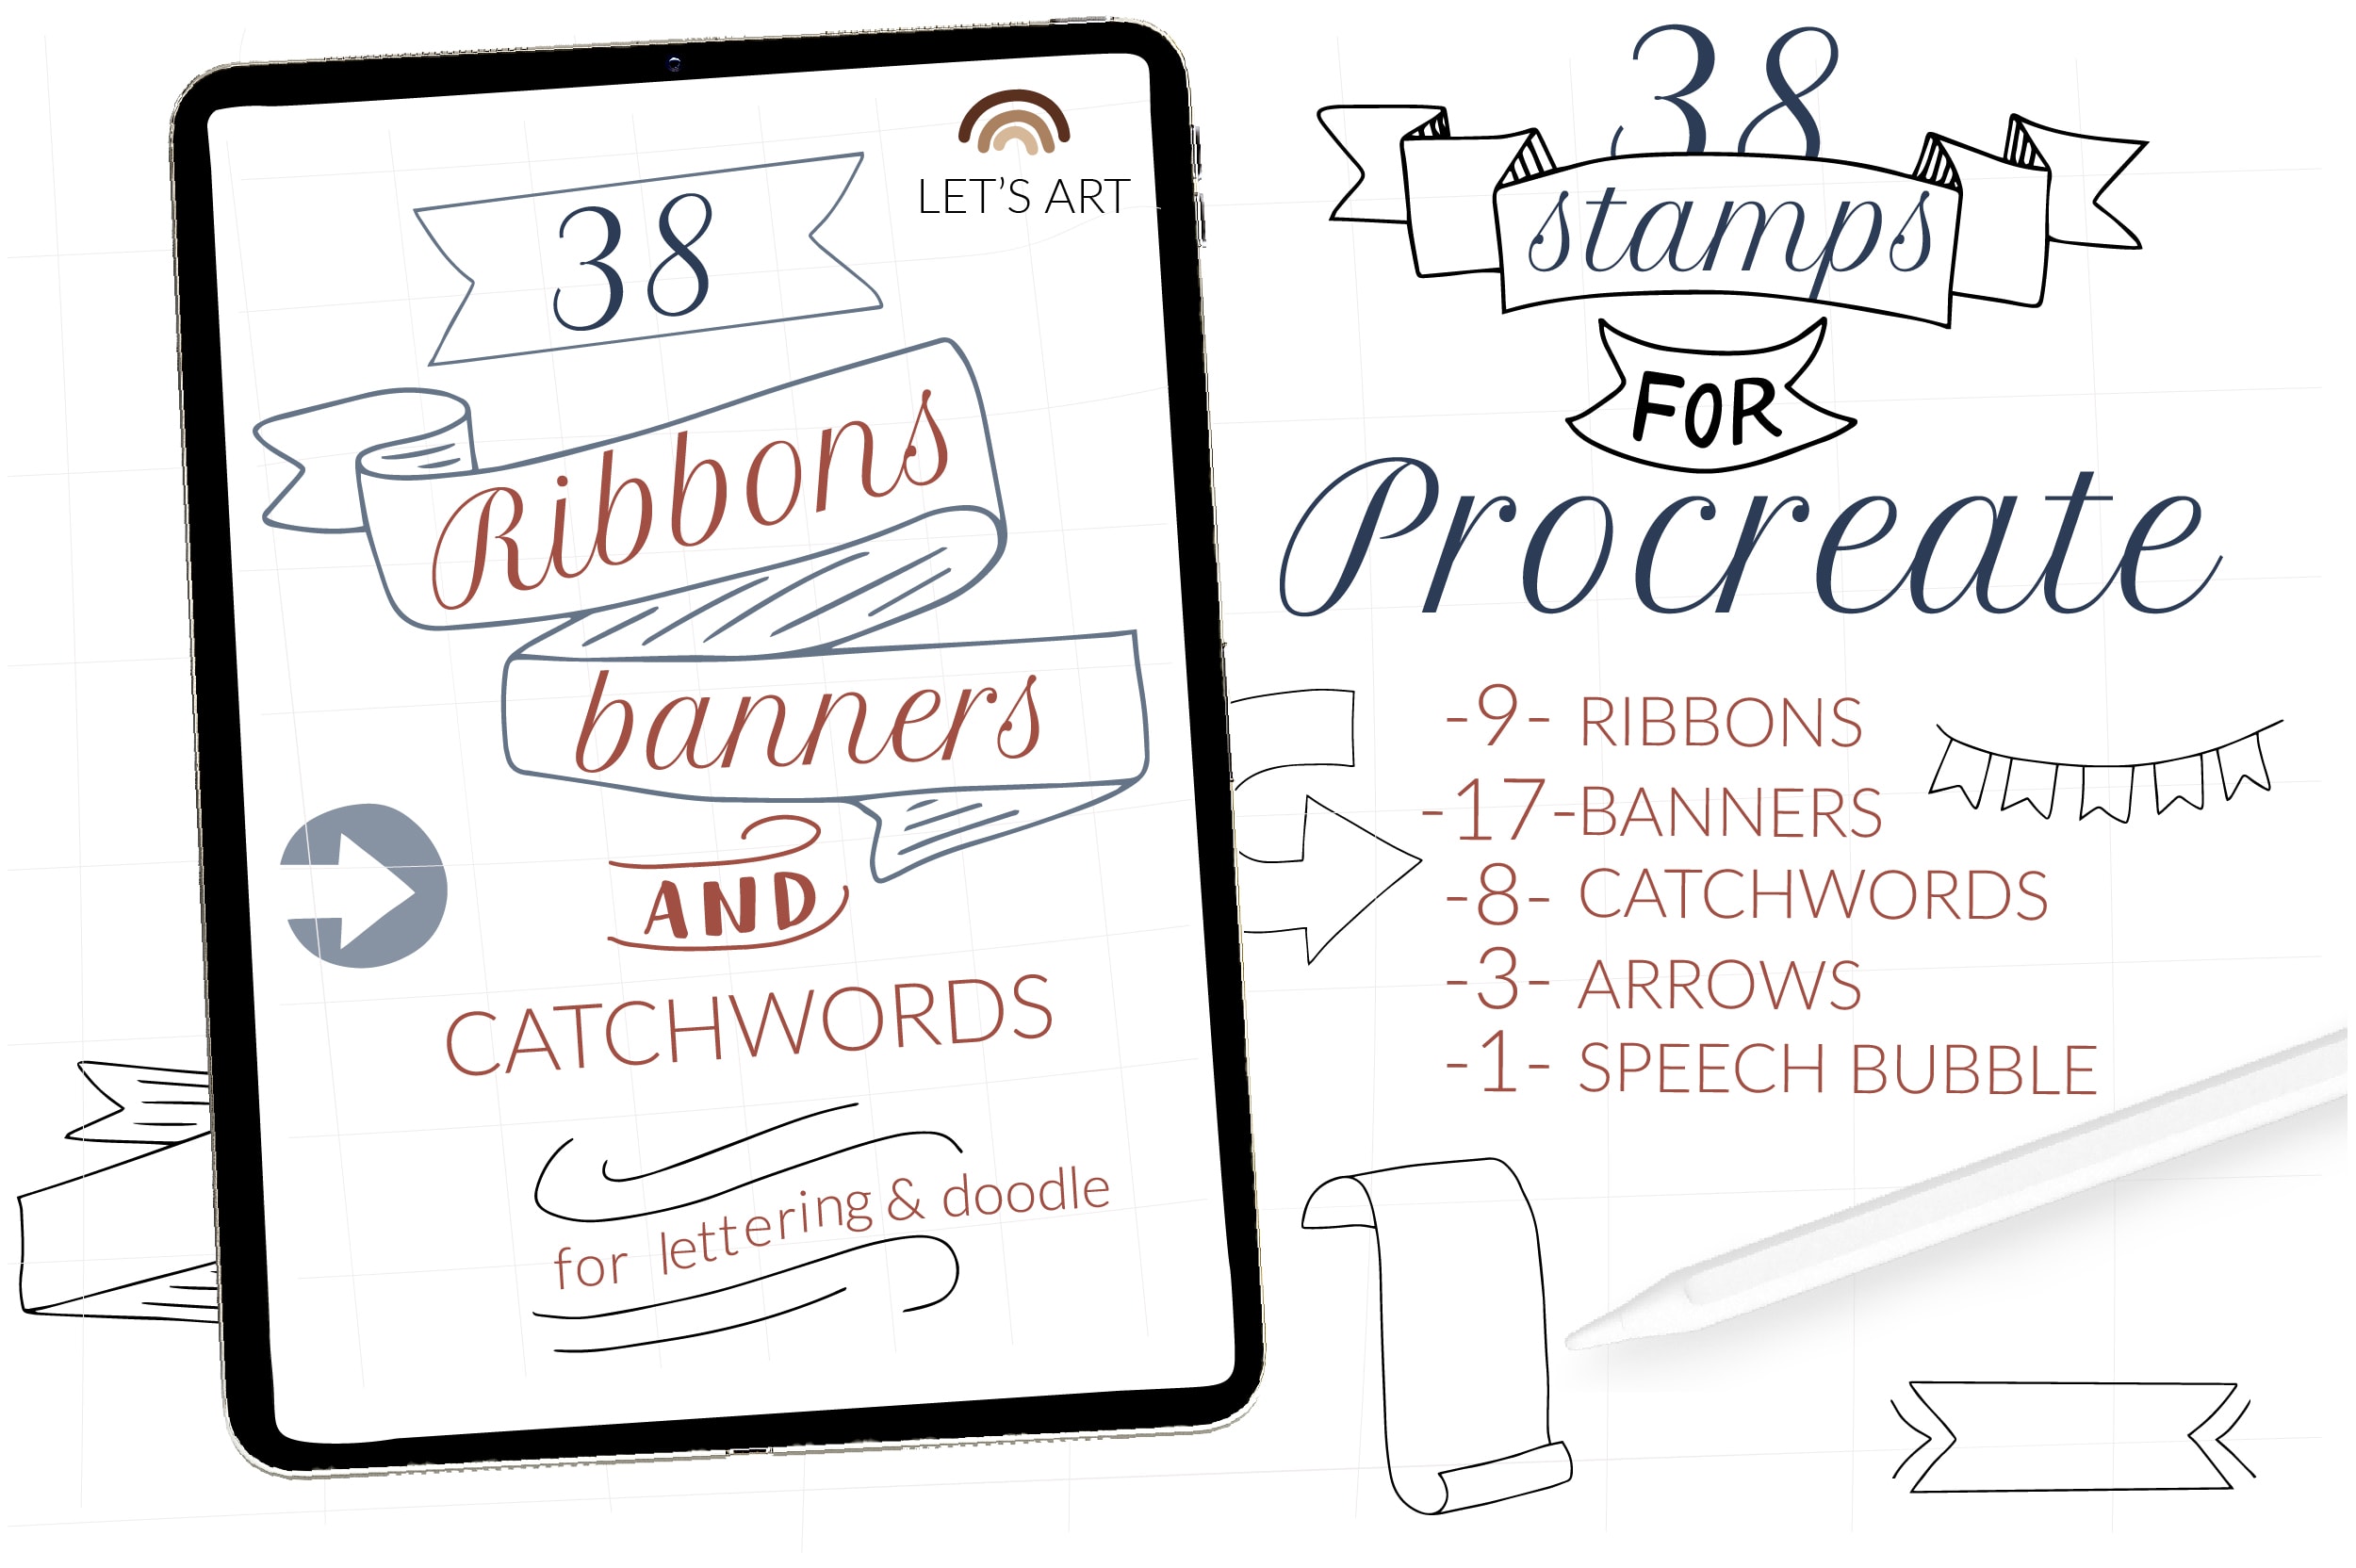 Ribbons, banners, catchwords for Lettering